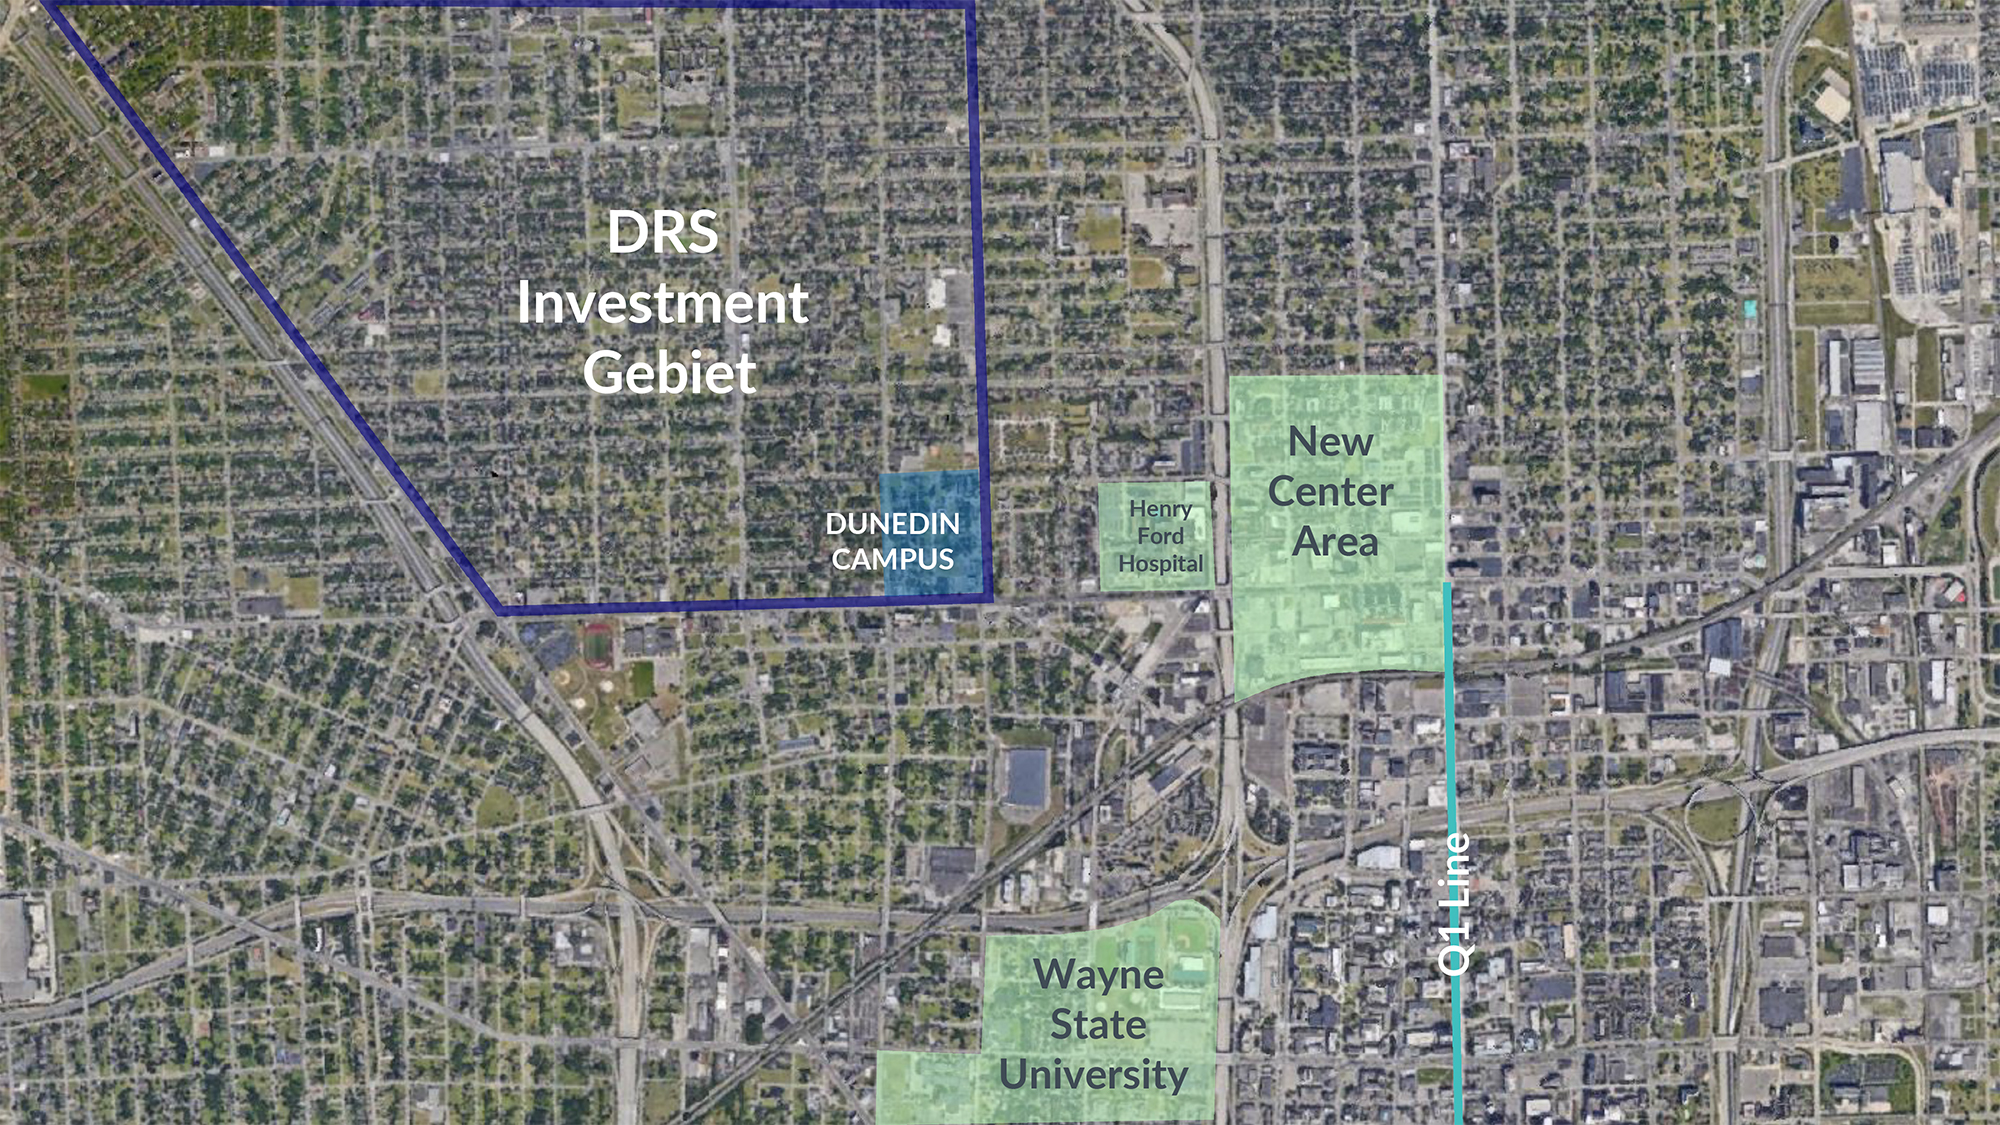 View of DRS investment Area and location in detroit